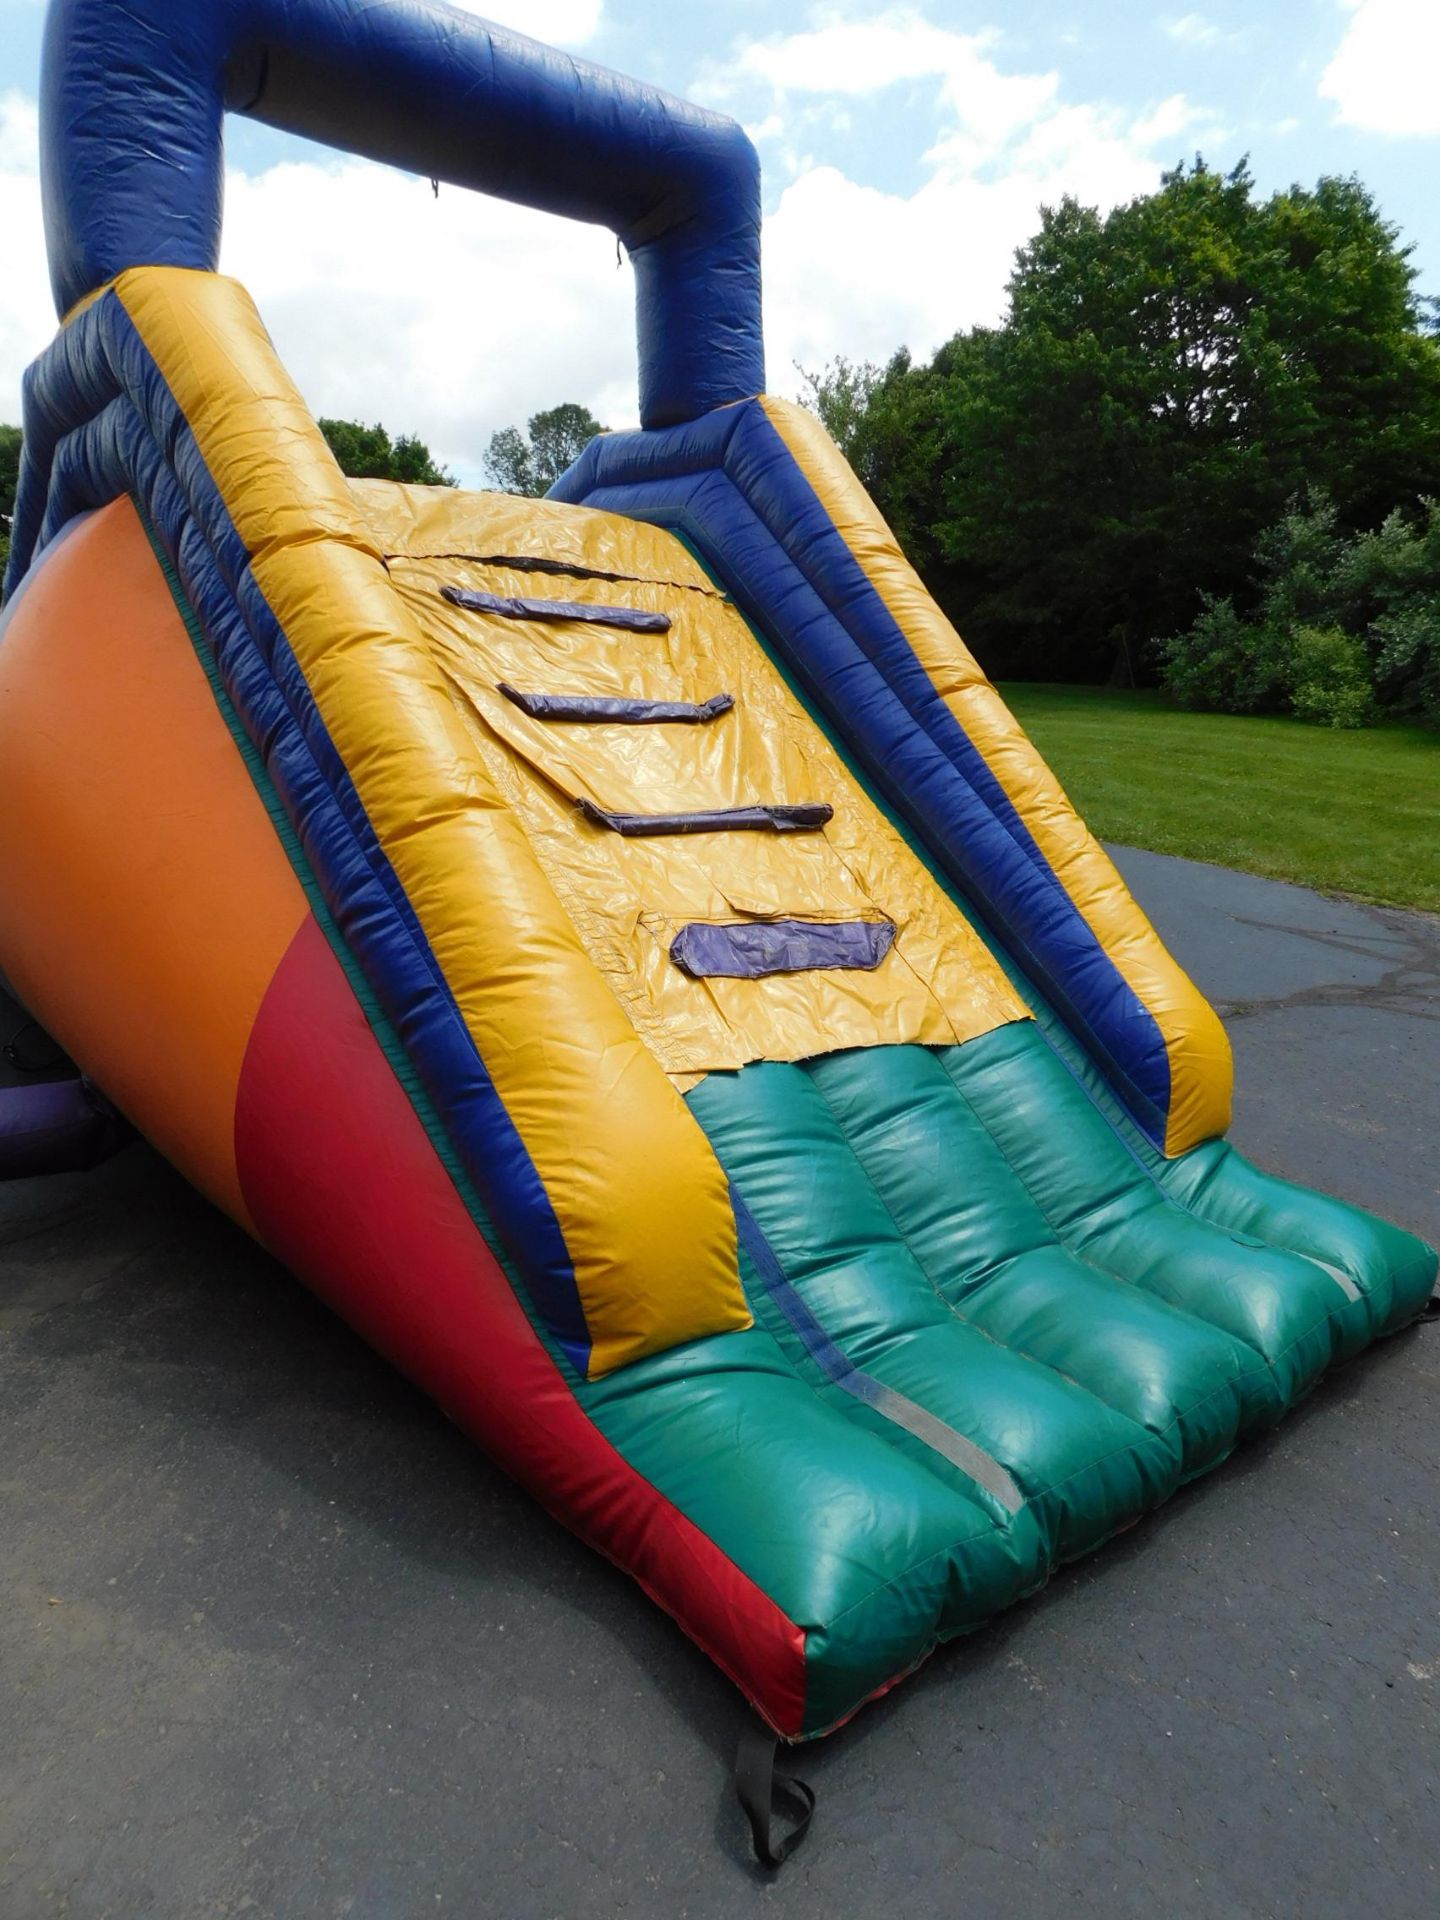 Inflatable Slide 12'Slide 1pc. 1 Blower req. 8'WX30'LX12'H # 99 - Image 2 of 6